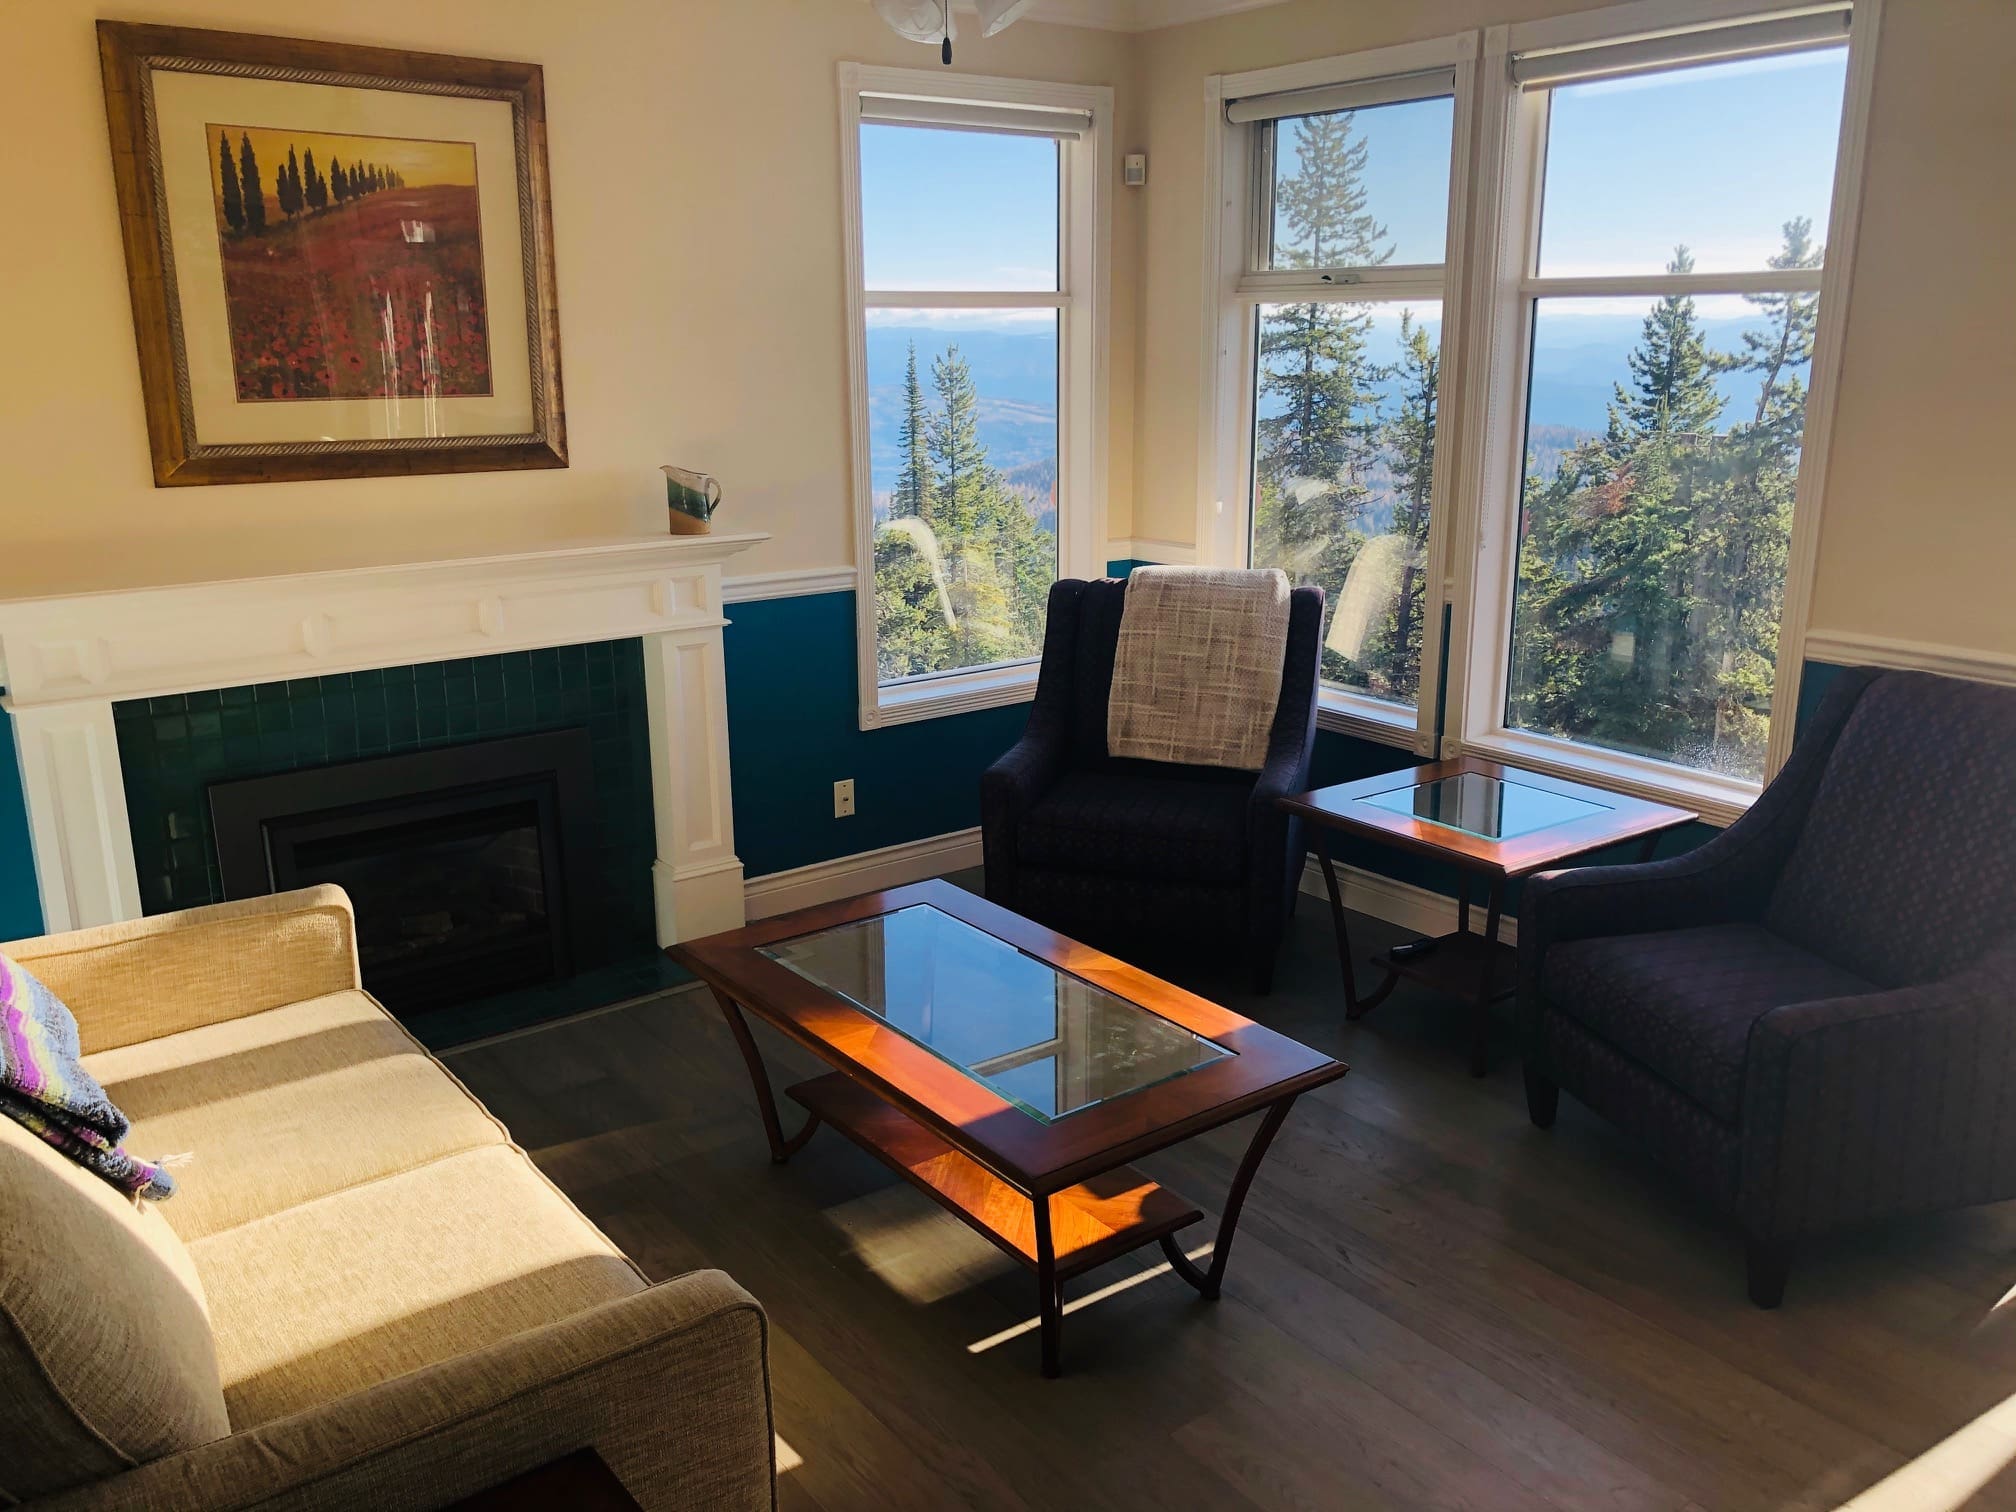 Bright large open windows in living room with incredible mountain views, gas fireplace. Private hot tub, shared laundry, BBQ on large deck, and ski storage. Ski right out from your backyard onto the skiway to start your day.